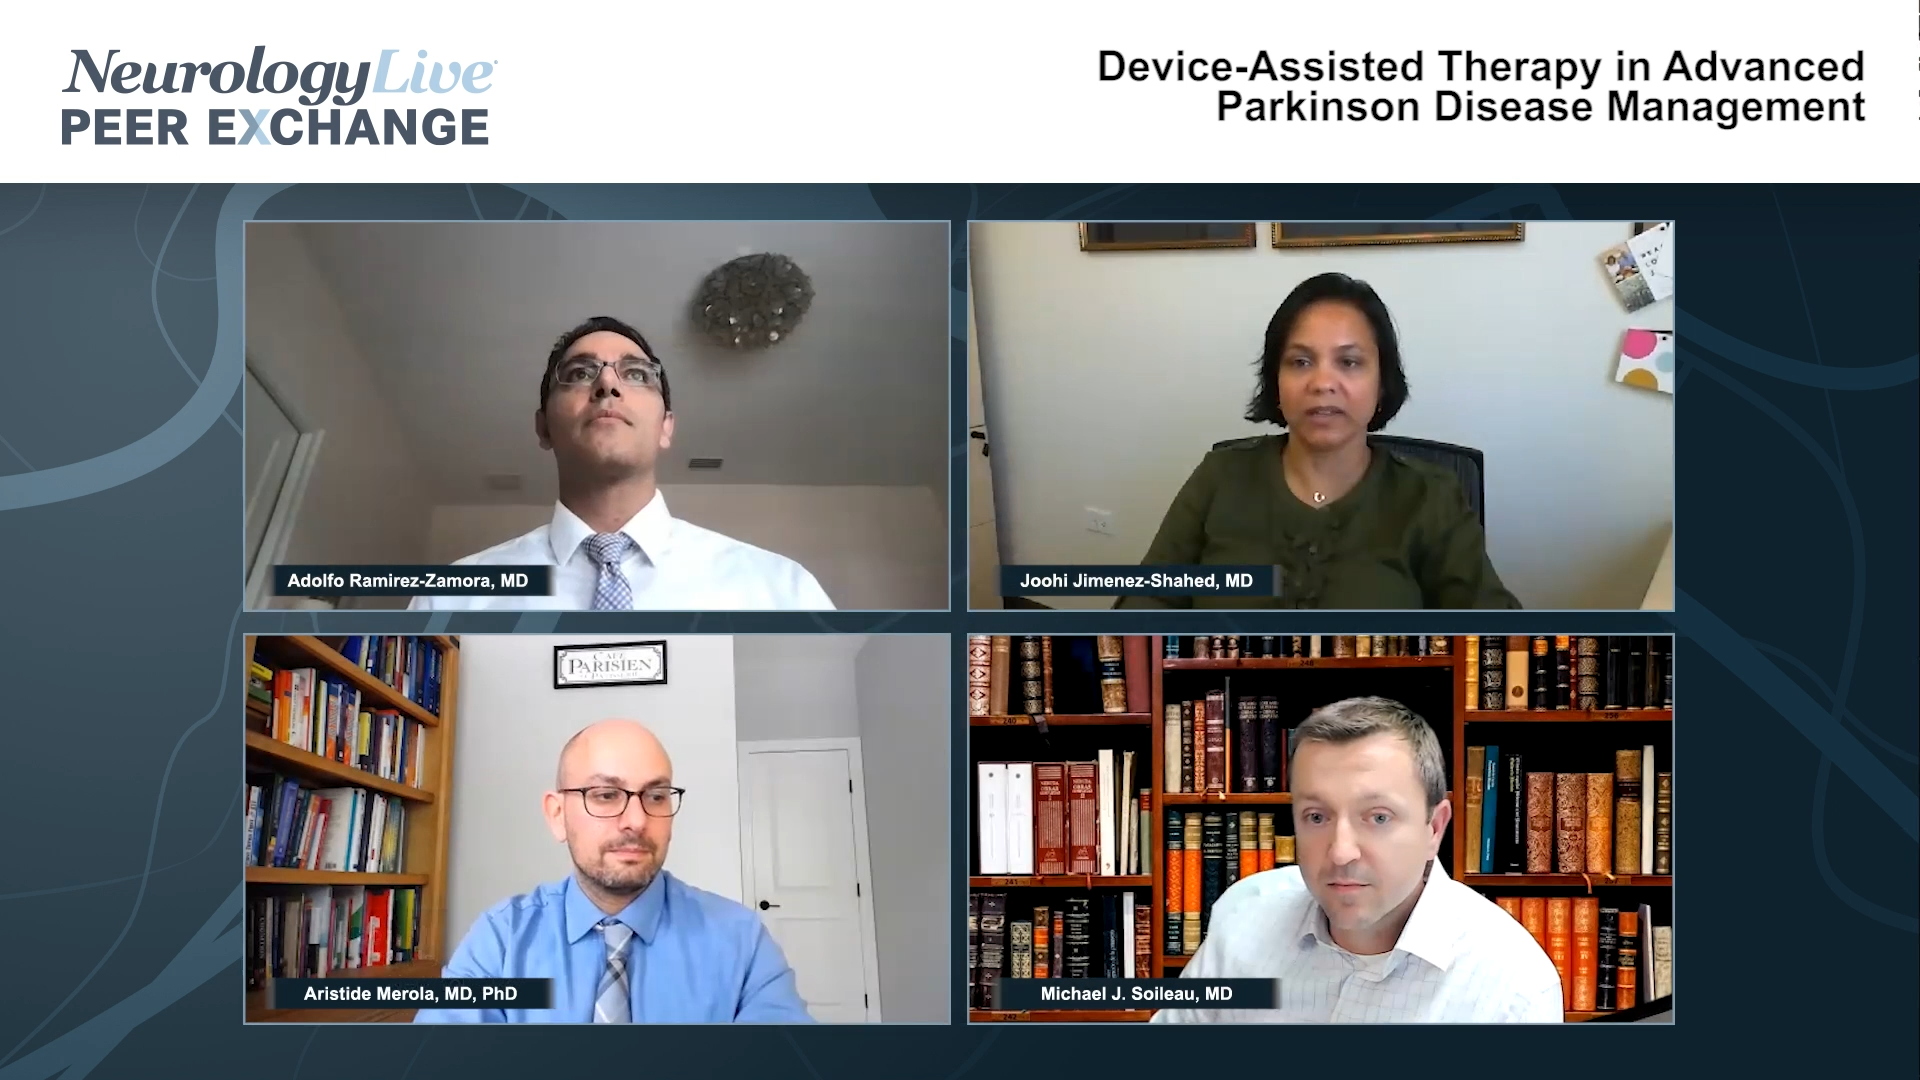 Device-Assisted Therapy in Advanced Parkinson Disease Management  